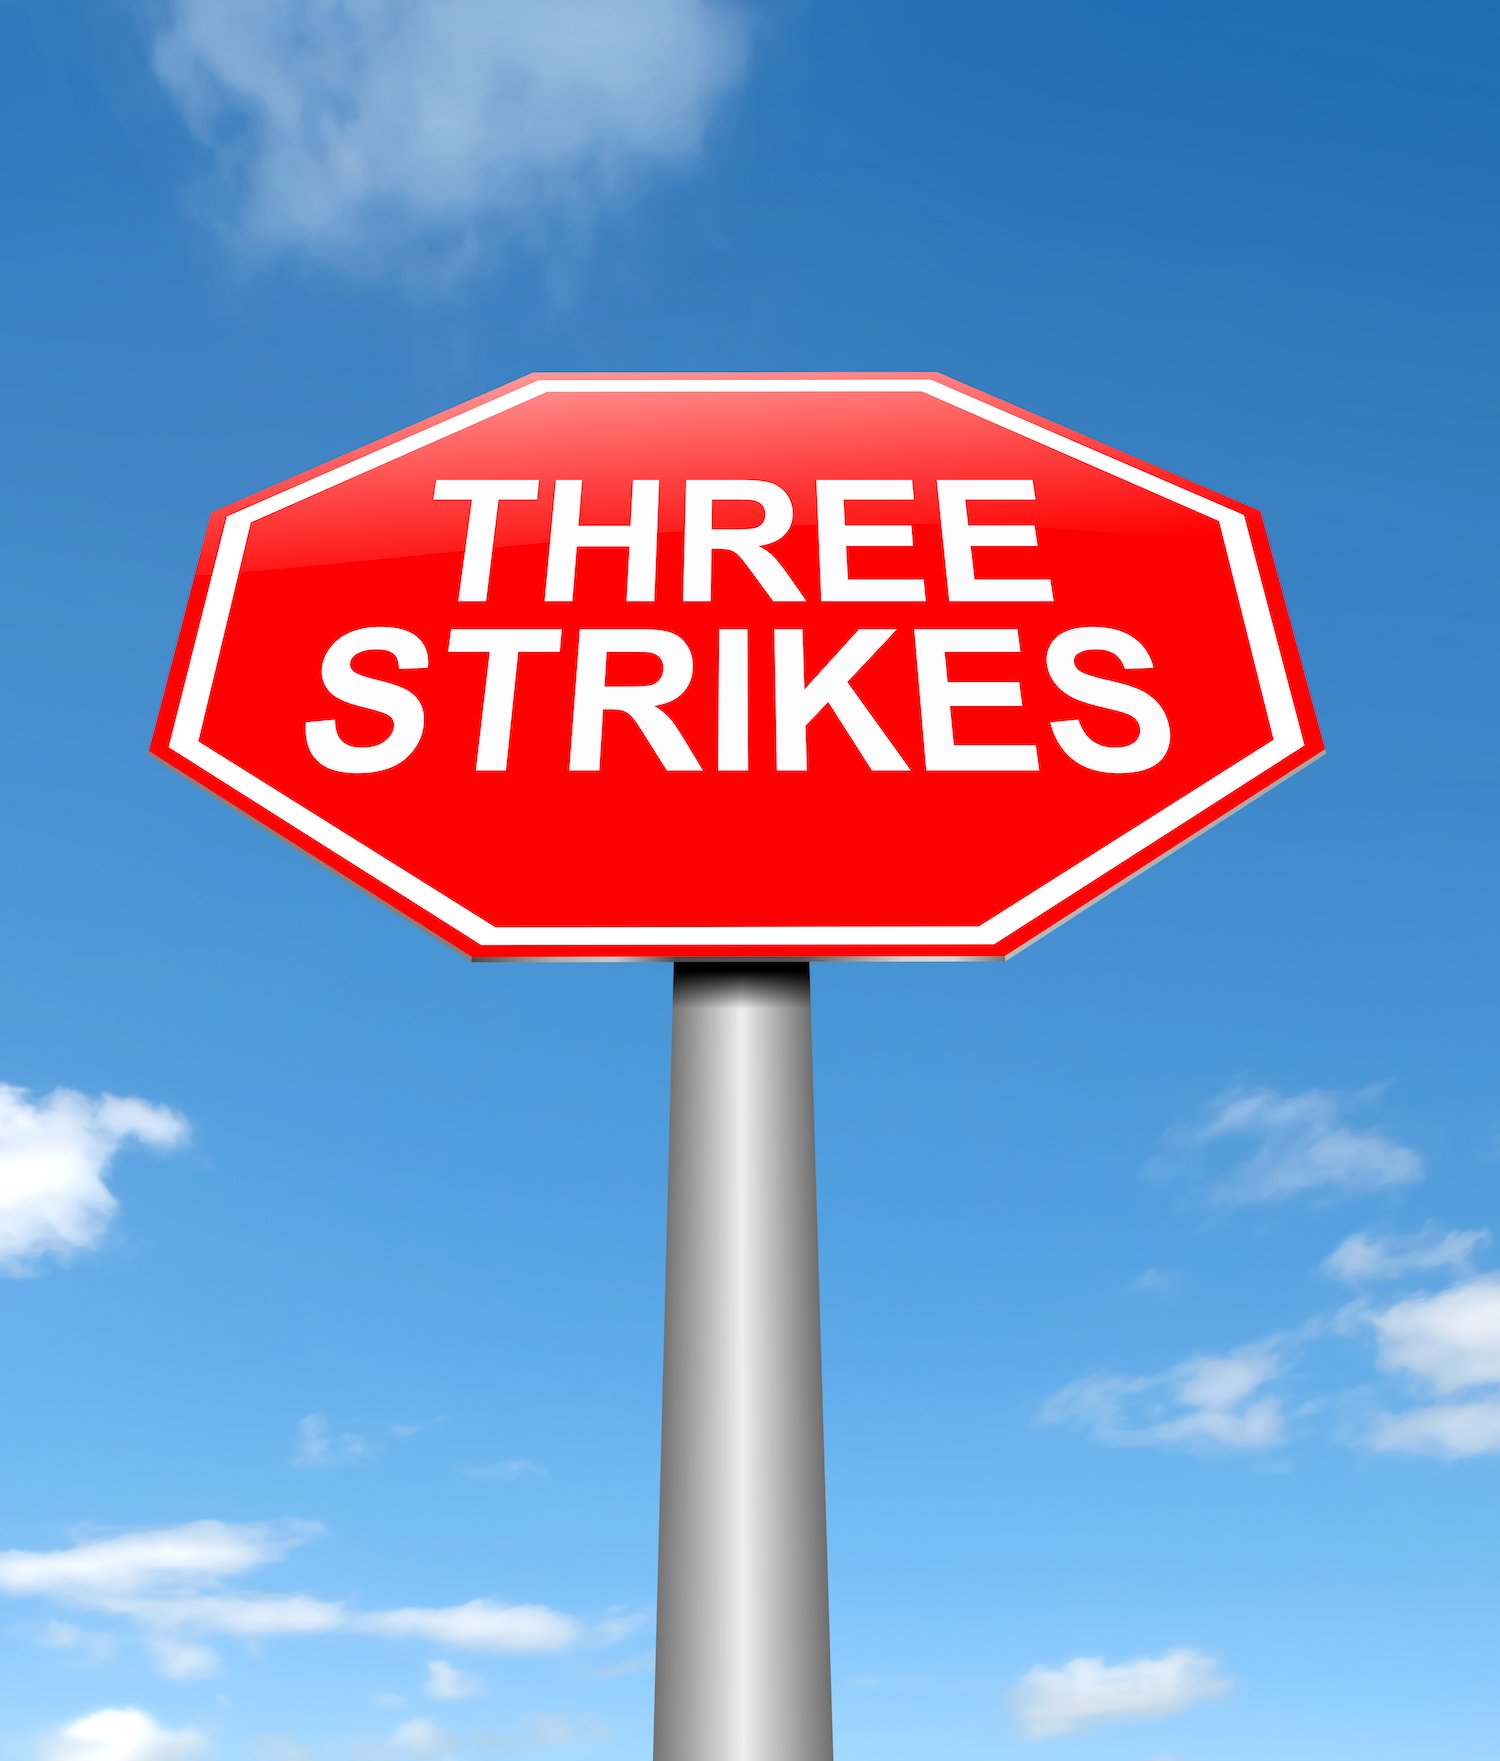 Sign that says "Three Strikes" against blue sky